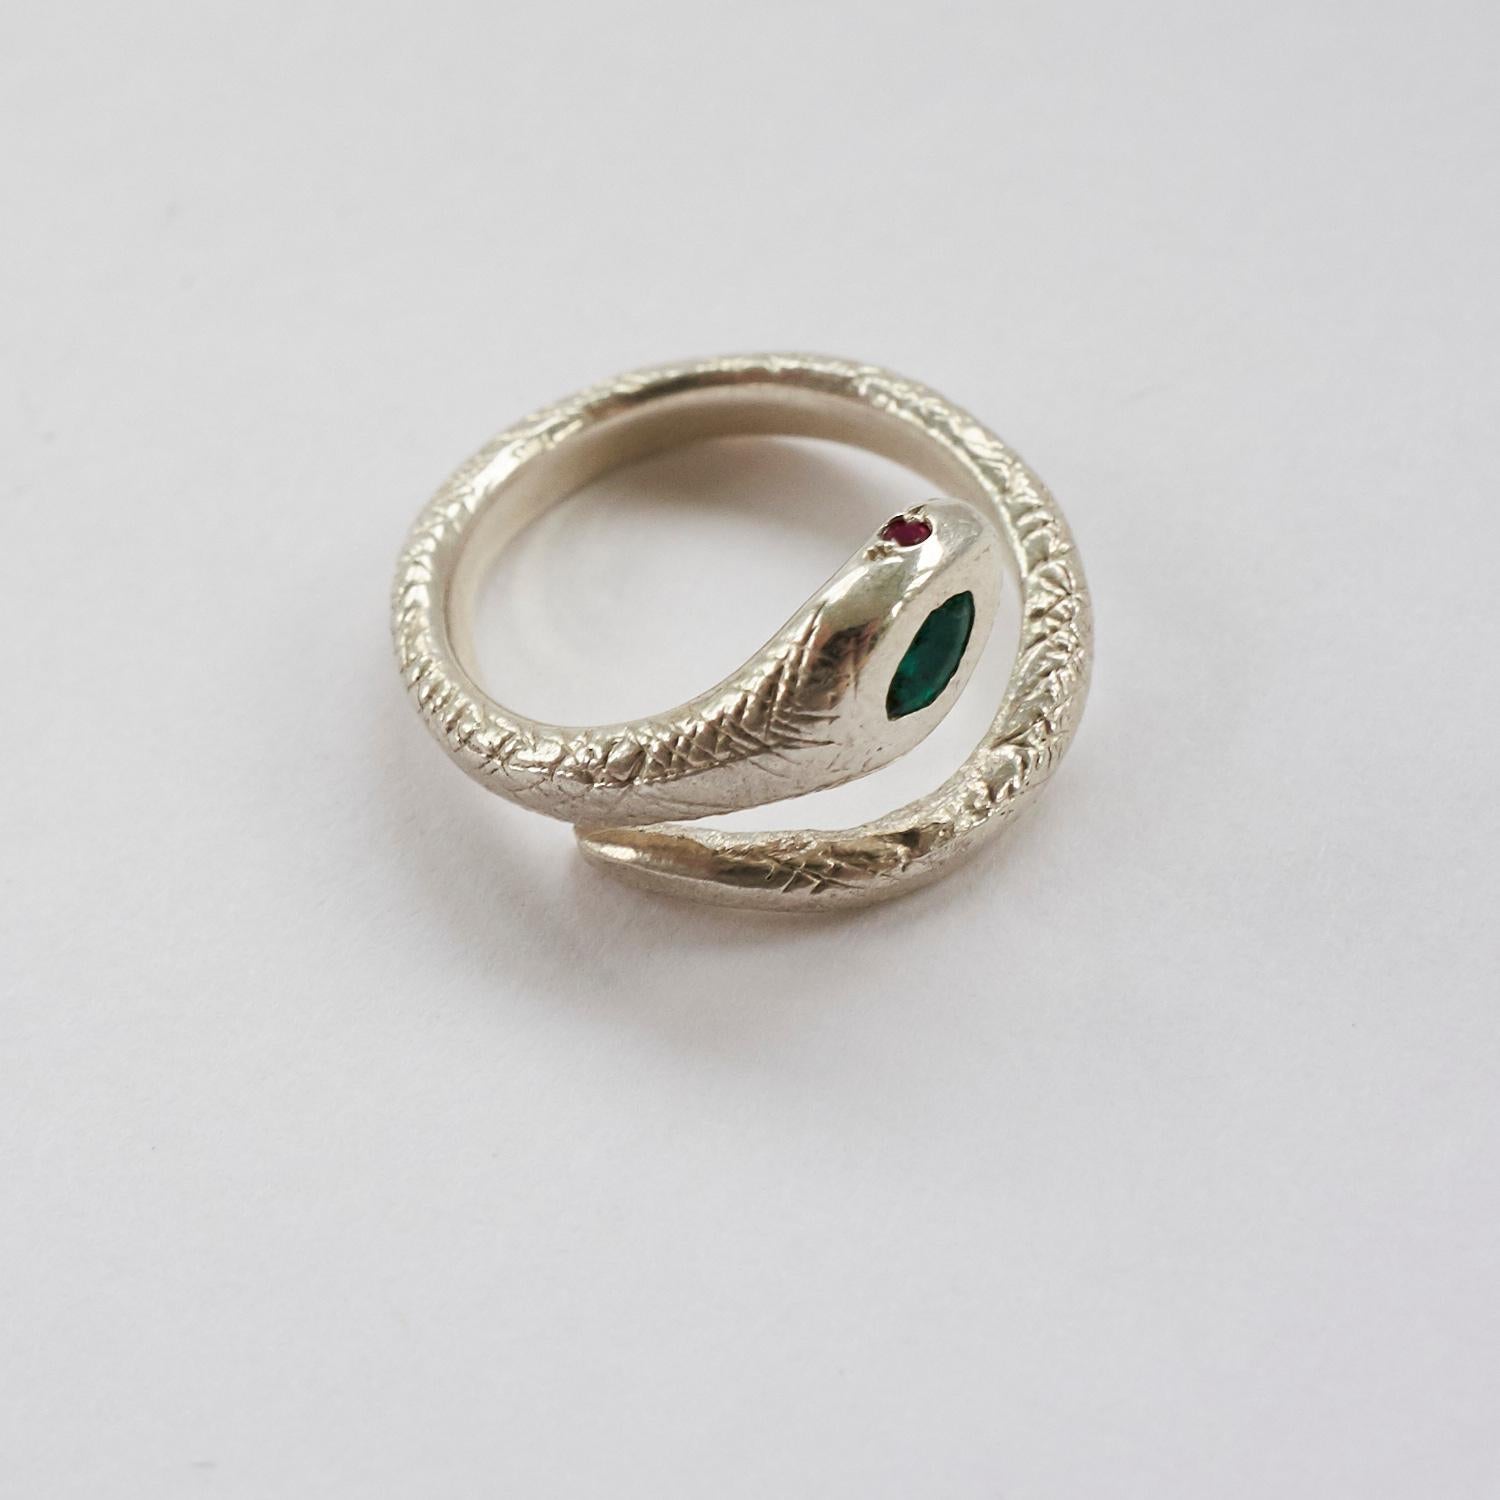 Emerald Ruby Snake Ring Silver Adjustable Victorian Cocktail Style Animal Ring J Dauphin

J DAUPHIN 